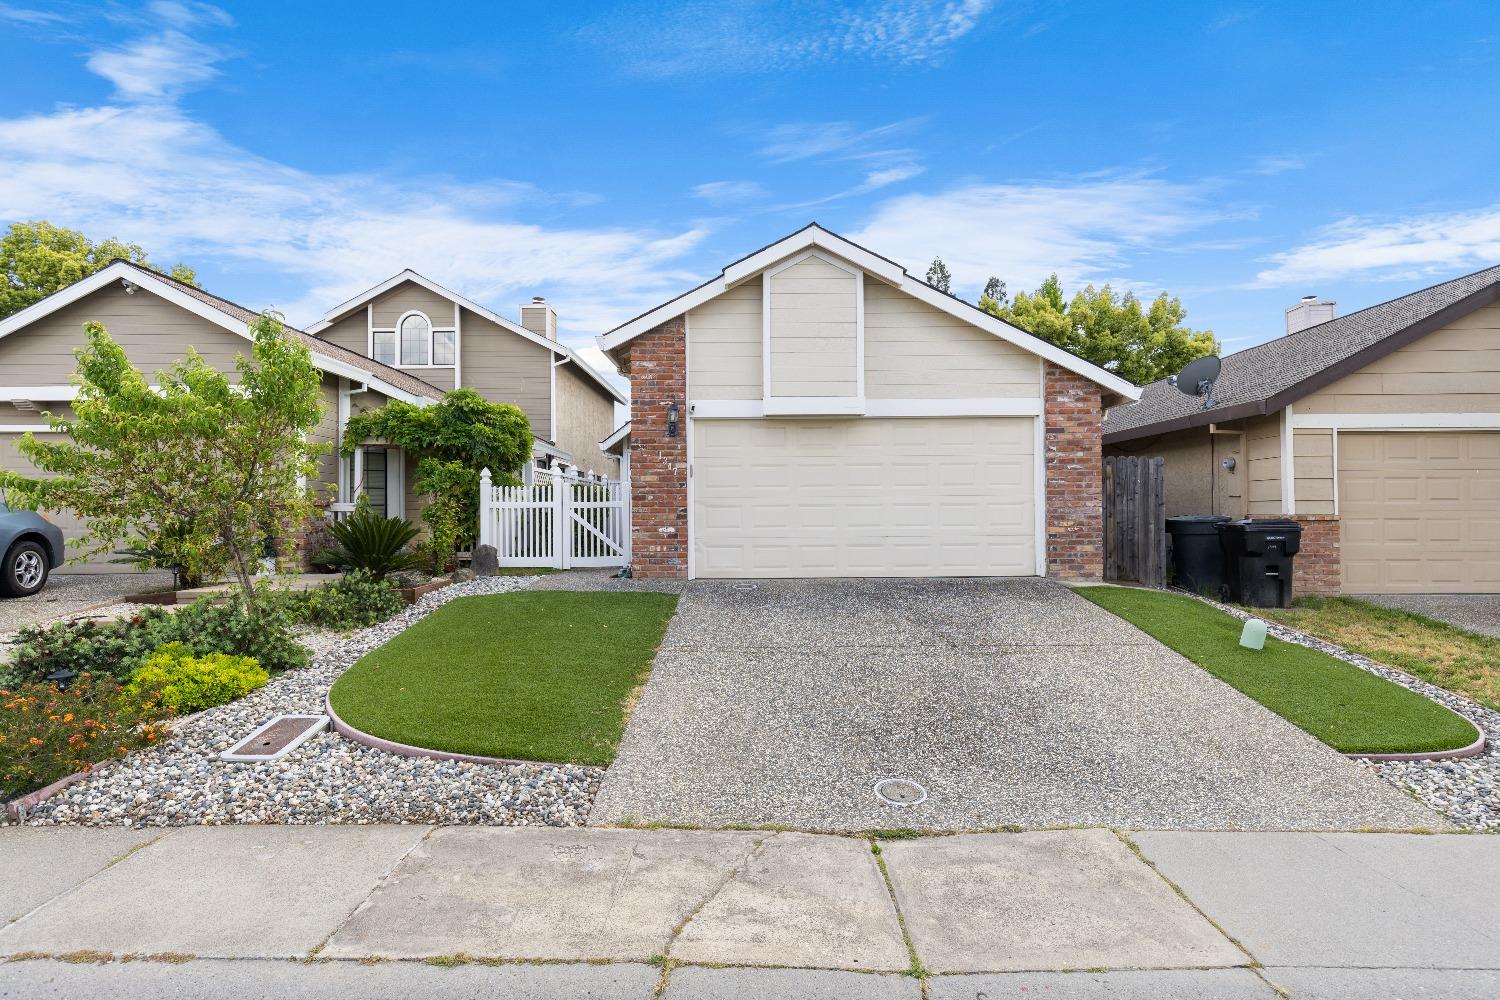 Photo of 1347 Chignahuapan Wy in Roseville, CA